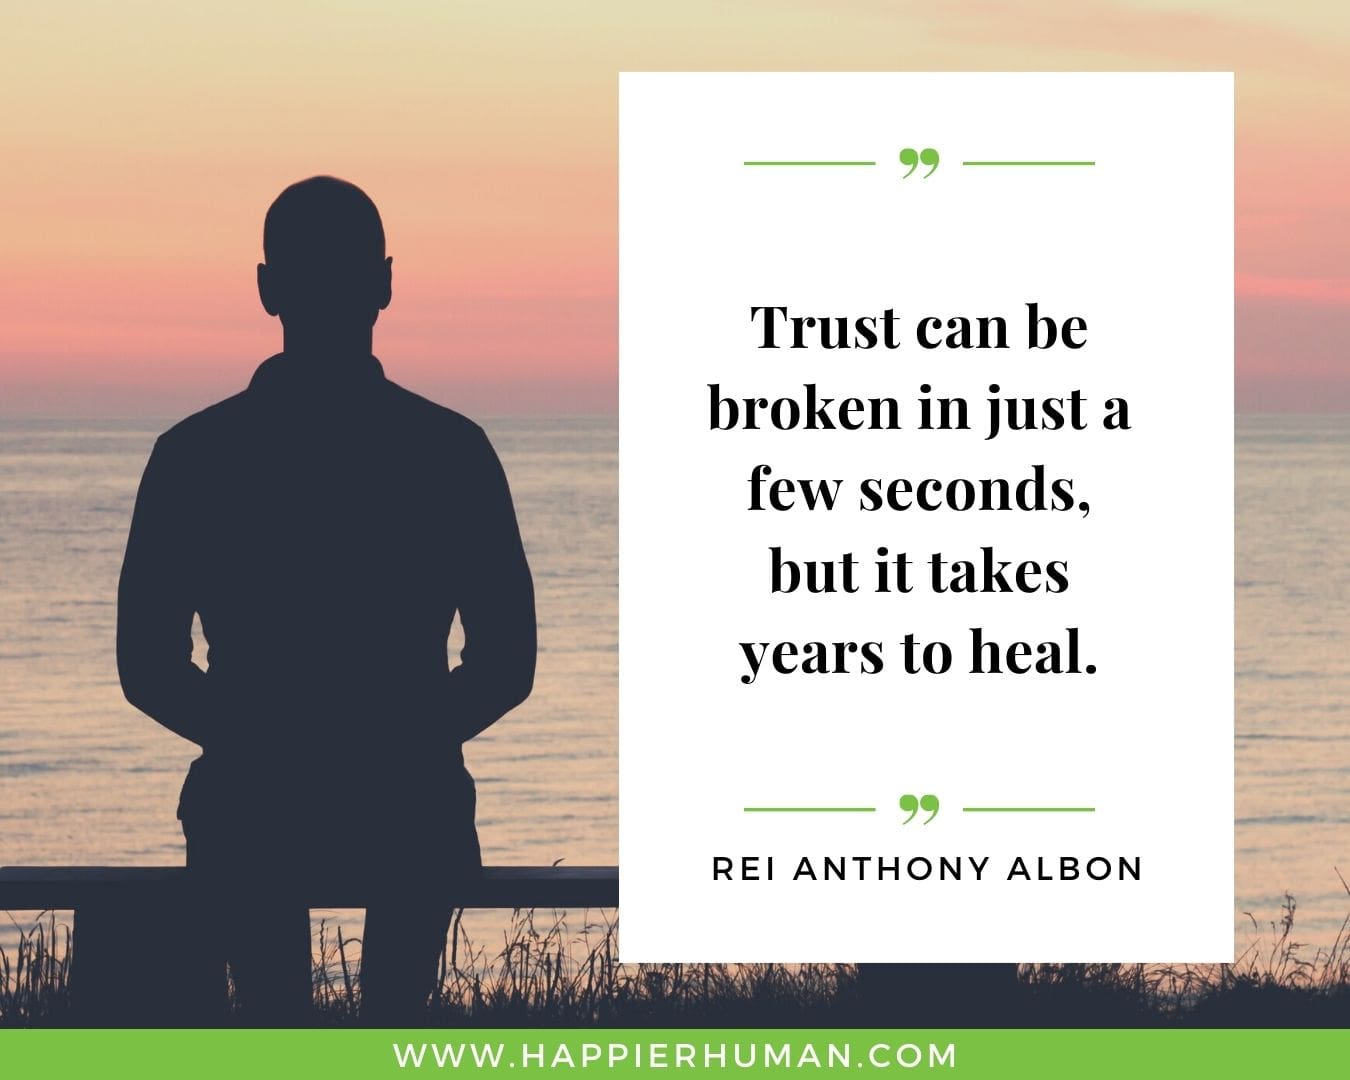 Broken Trust Quotes - “Trust can be broken in just a few seconds, but it takes years to heal.” - Rei Anthony Albon